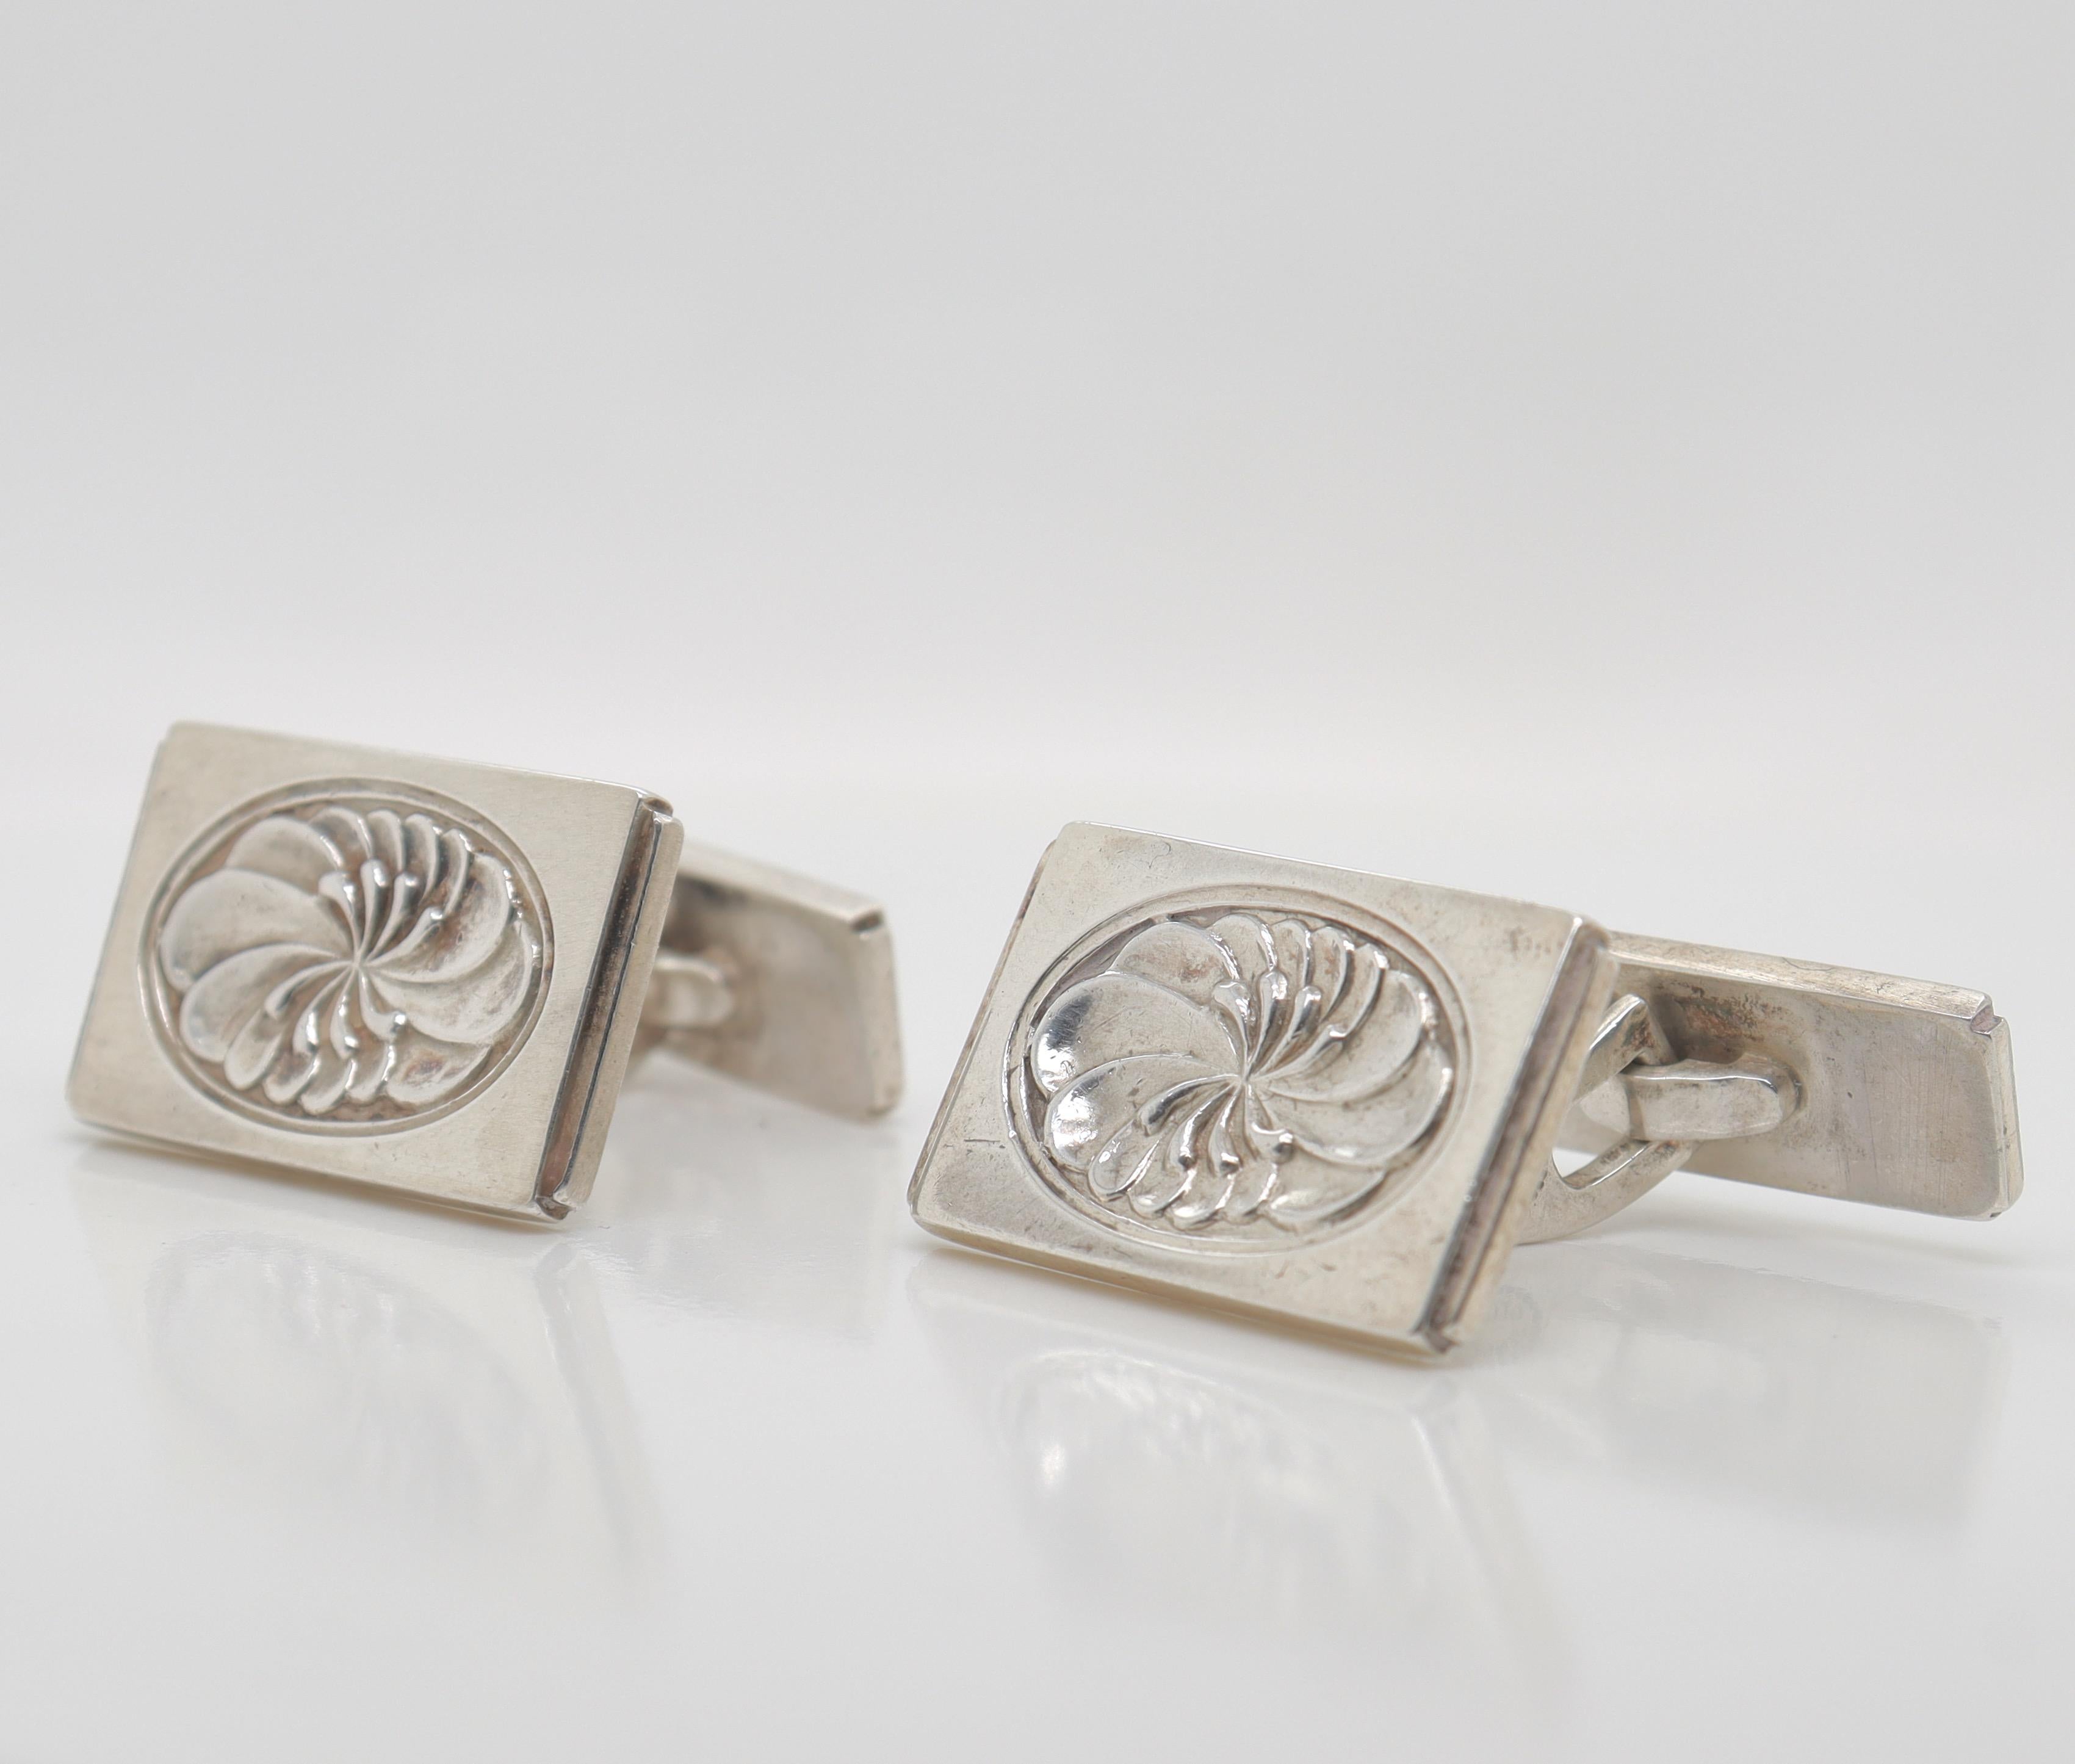 A fine pair of Georg Jensen sterling silver cufflinks.

Model no. 59A.

Designed by Henry Pilstrup for Georg Jensen.

Simply a wonderful pair of cufflinks from one of Denmark's premier silversmiths!

Date:
20th Century, post-1945

Overall